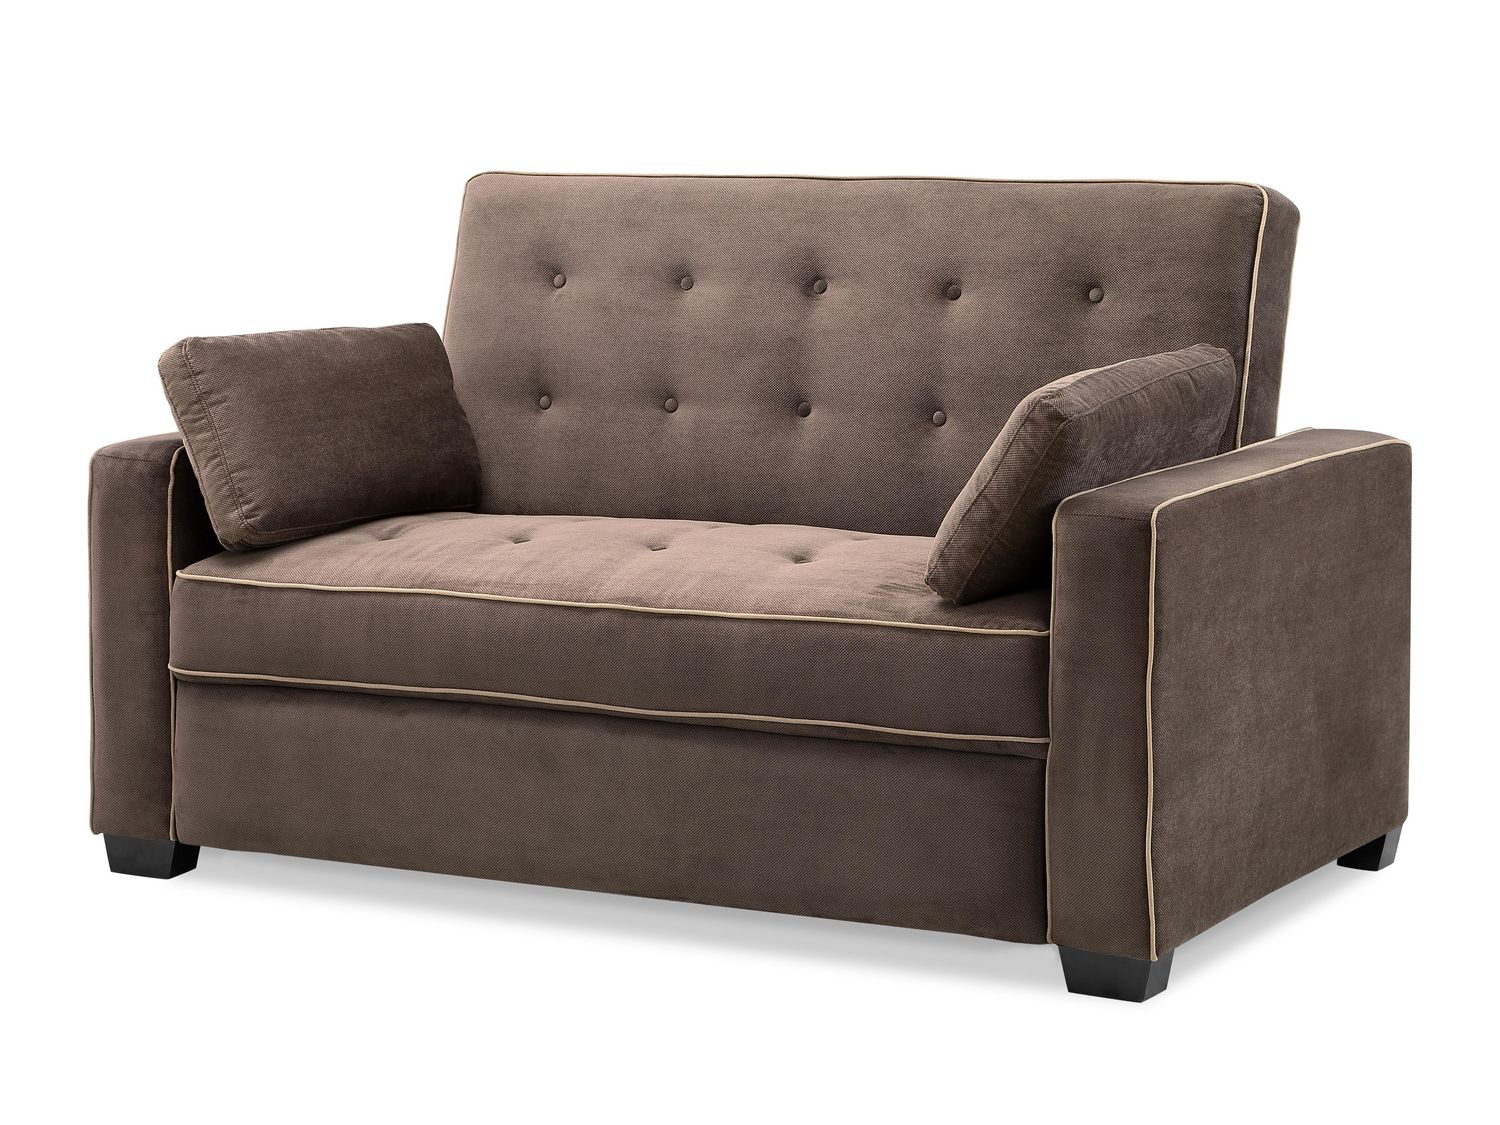 lifestyle solutions delray convertible sofa bed